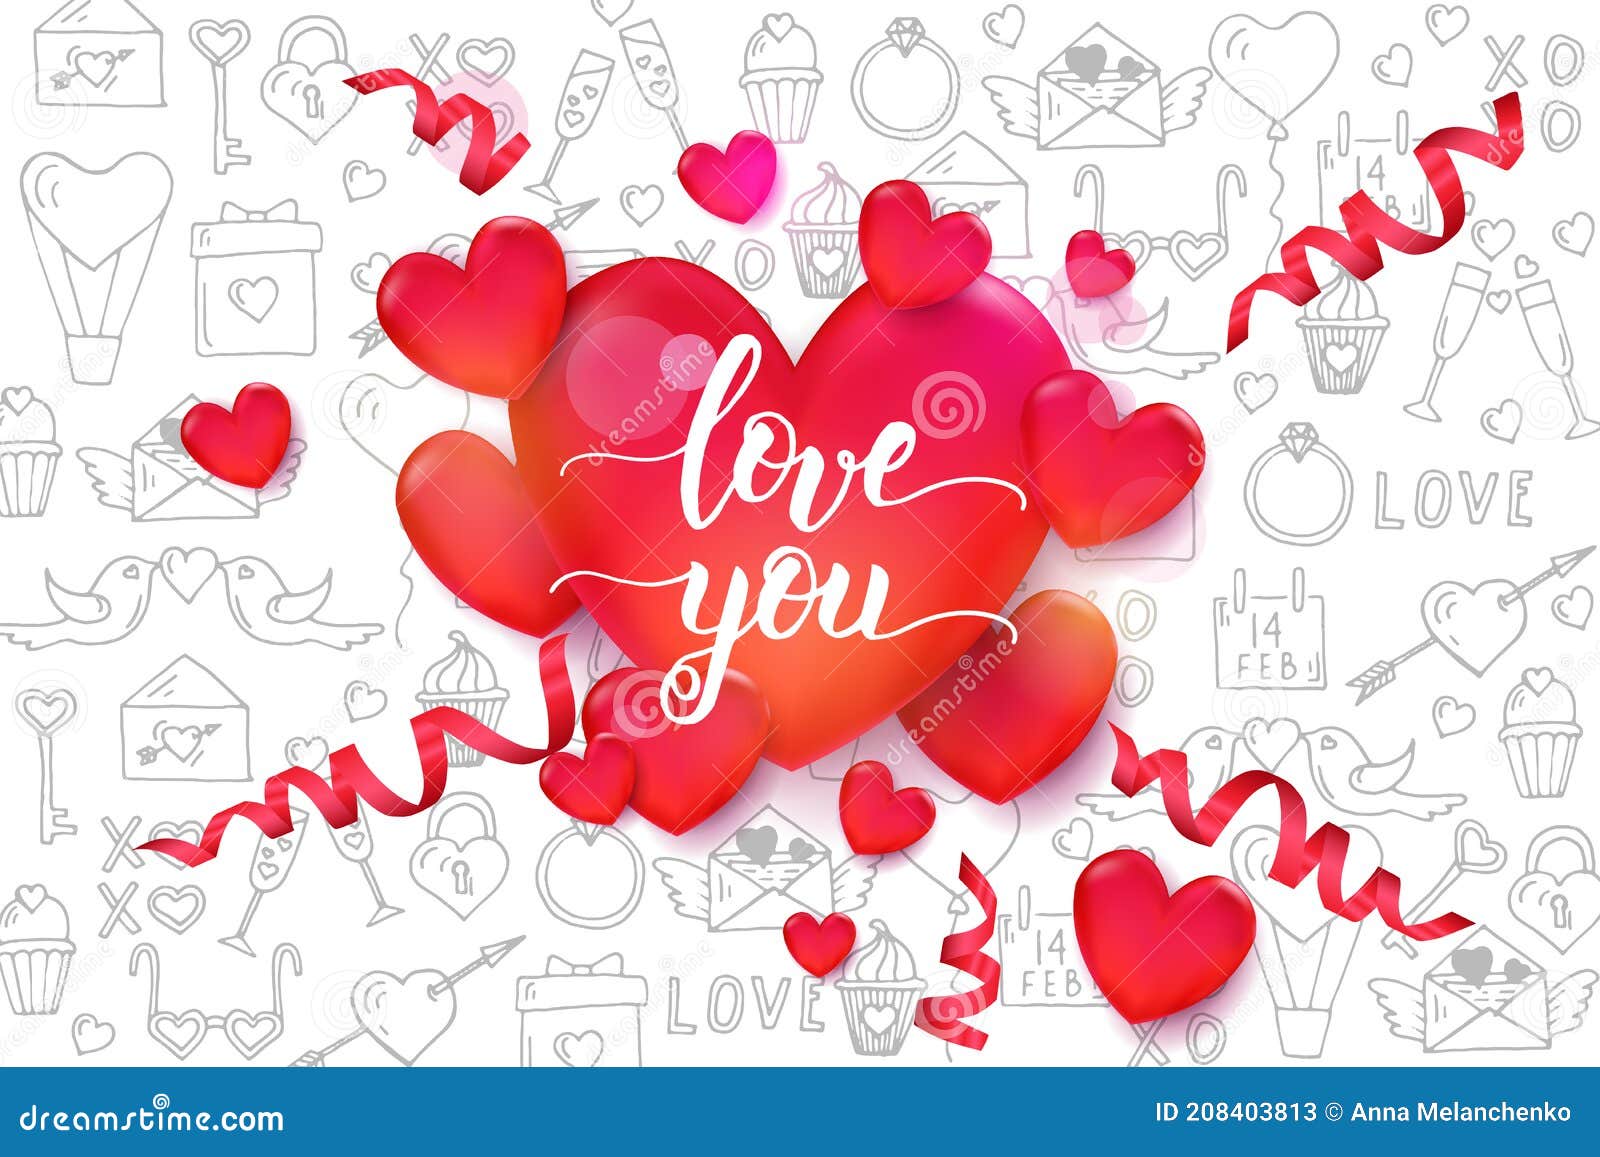 love you - handwritting motivational quote. valentine's day background with 3d red hearts and serpentine on pattern